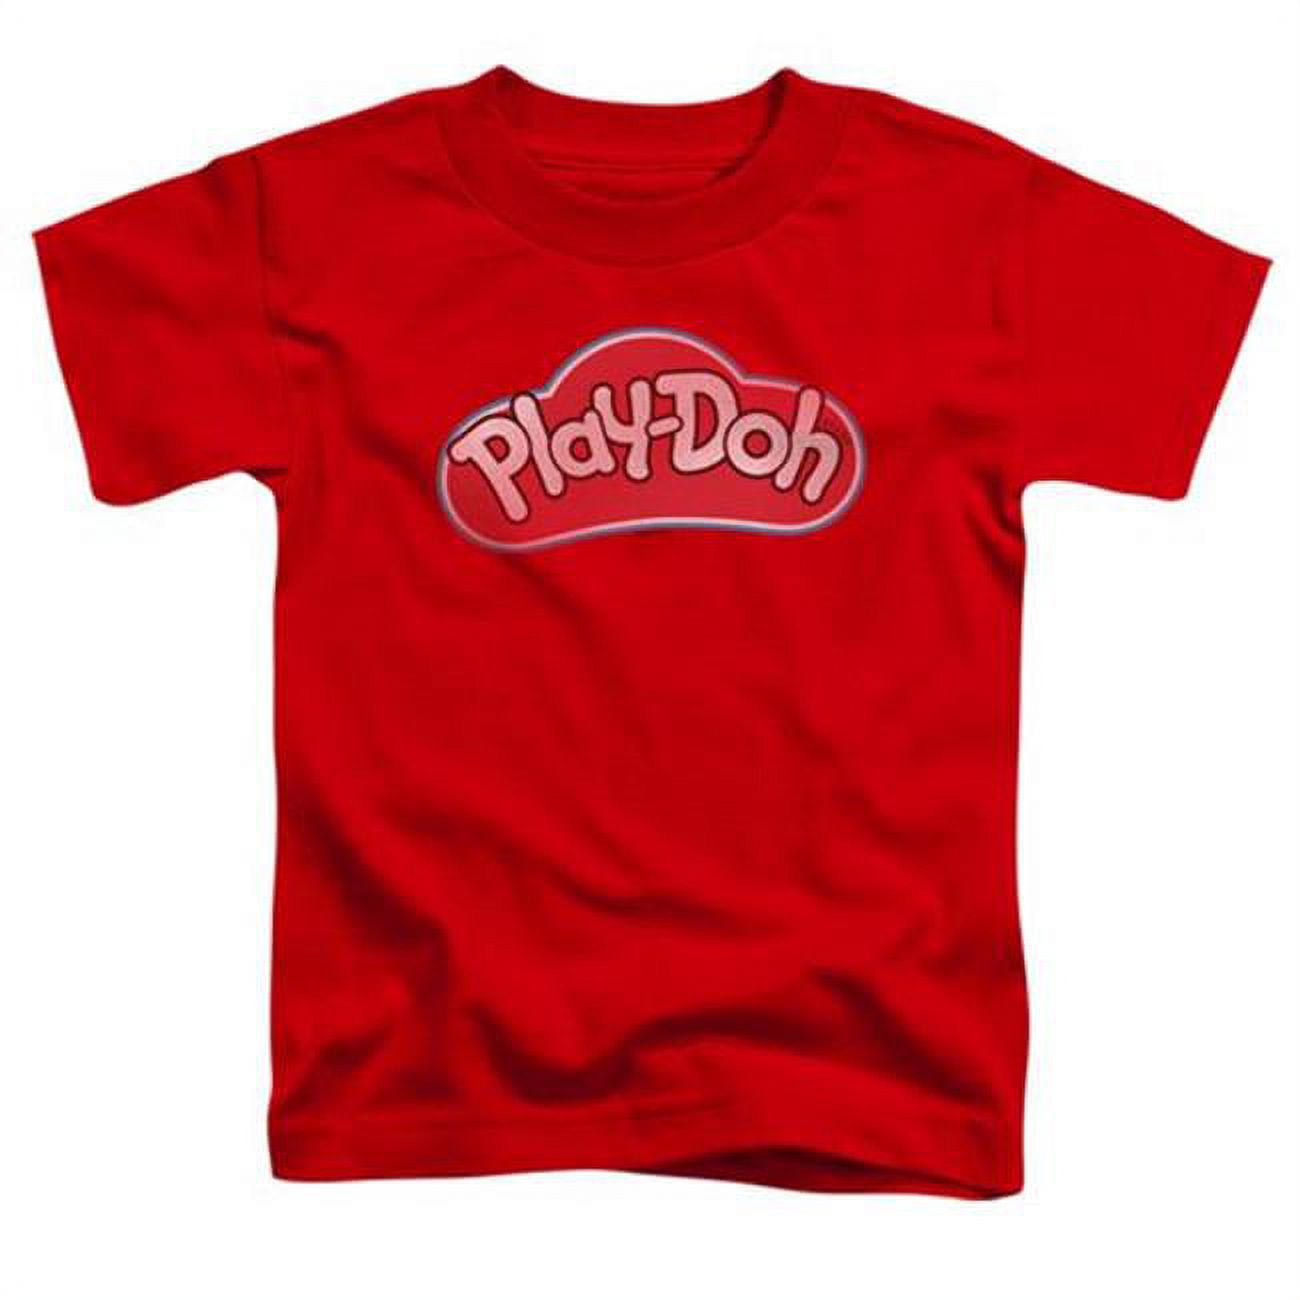 Trevco  HBRO153C-TT-3 Play Doh & Lid Toddler Short Sleeve T-Shirt, Red - Large 4T - image 1 of 1